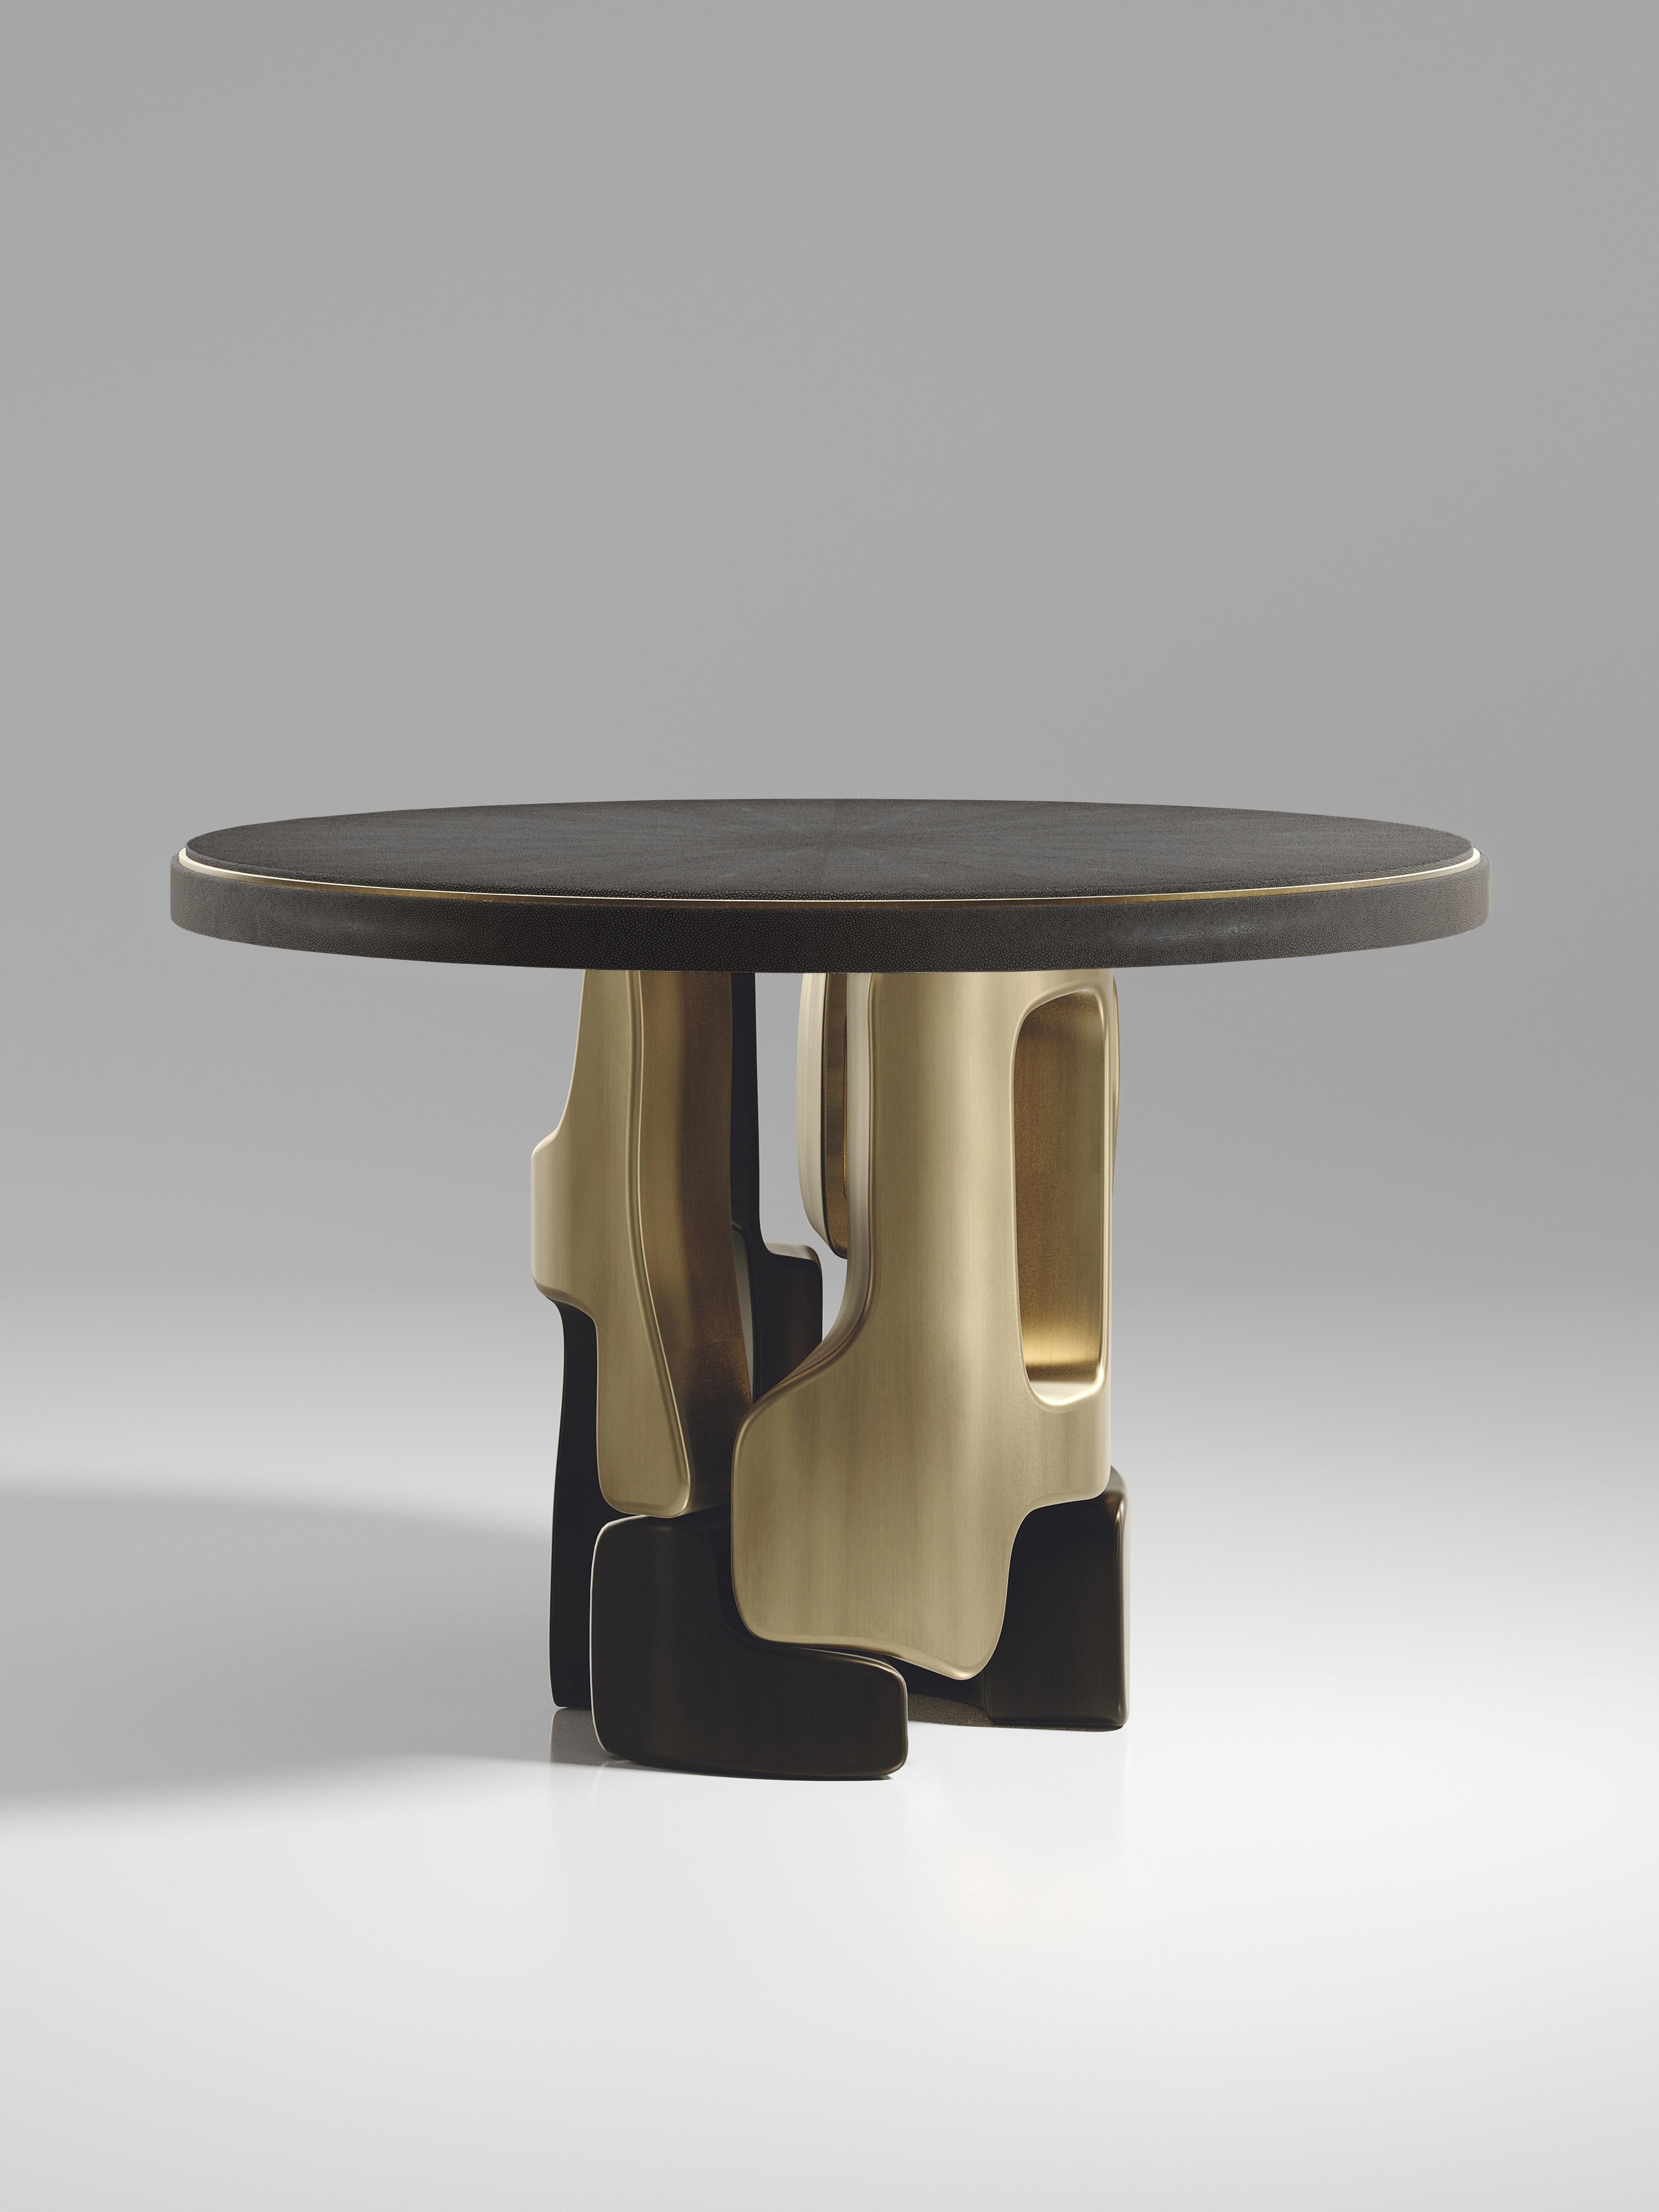 The Apoli breakfast table by Kifu Paris is both dramatic and organic its unique design. The black shagreen inlaid top sits on an ethereal geometric and sculptural bronze-patina brass base. This piece is designed by Kifu Augousti the daughter of Ria